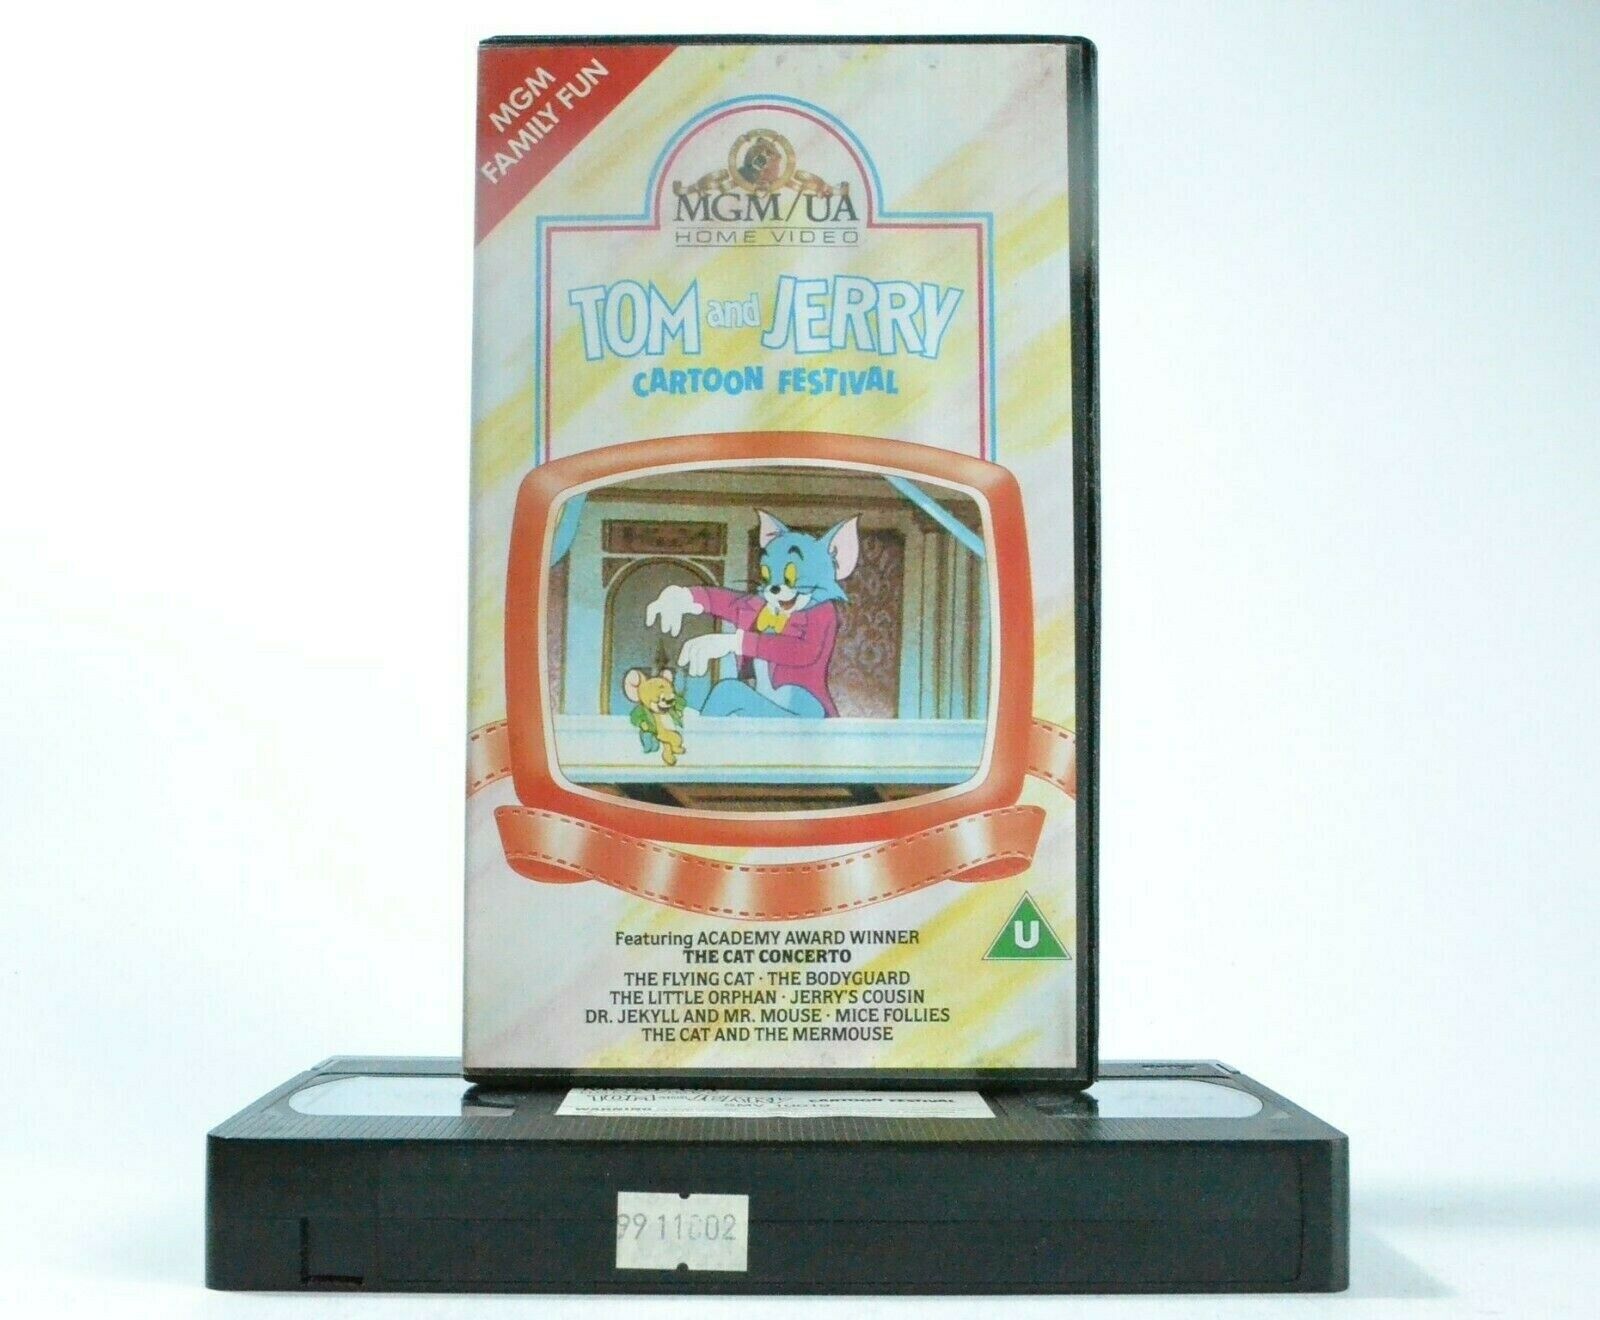 Tom And Jerry: Cartoon Festival - (1986) MGM/UA - Animated - Children's - VHS-